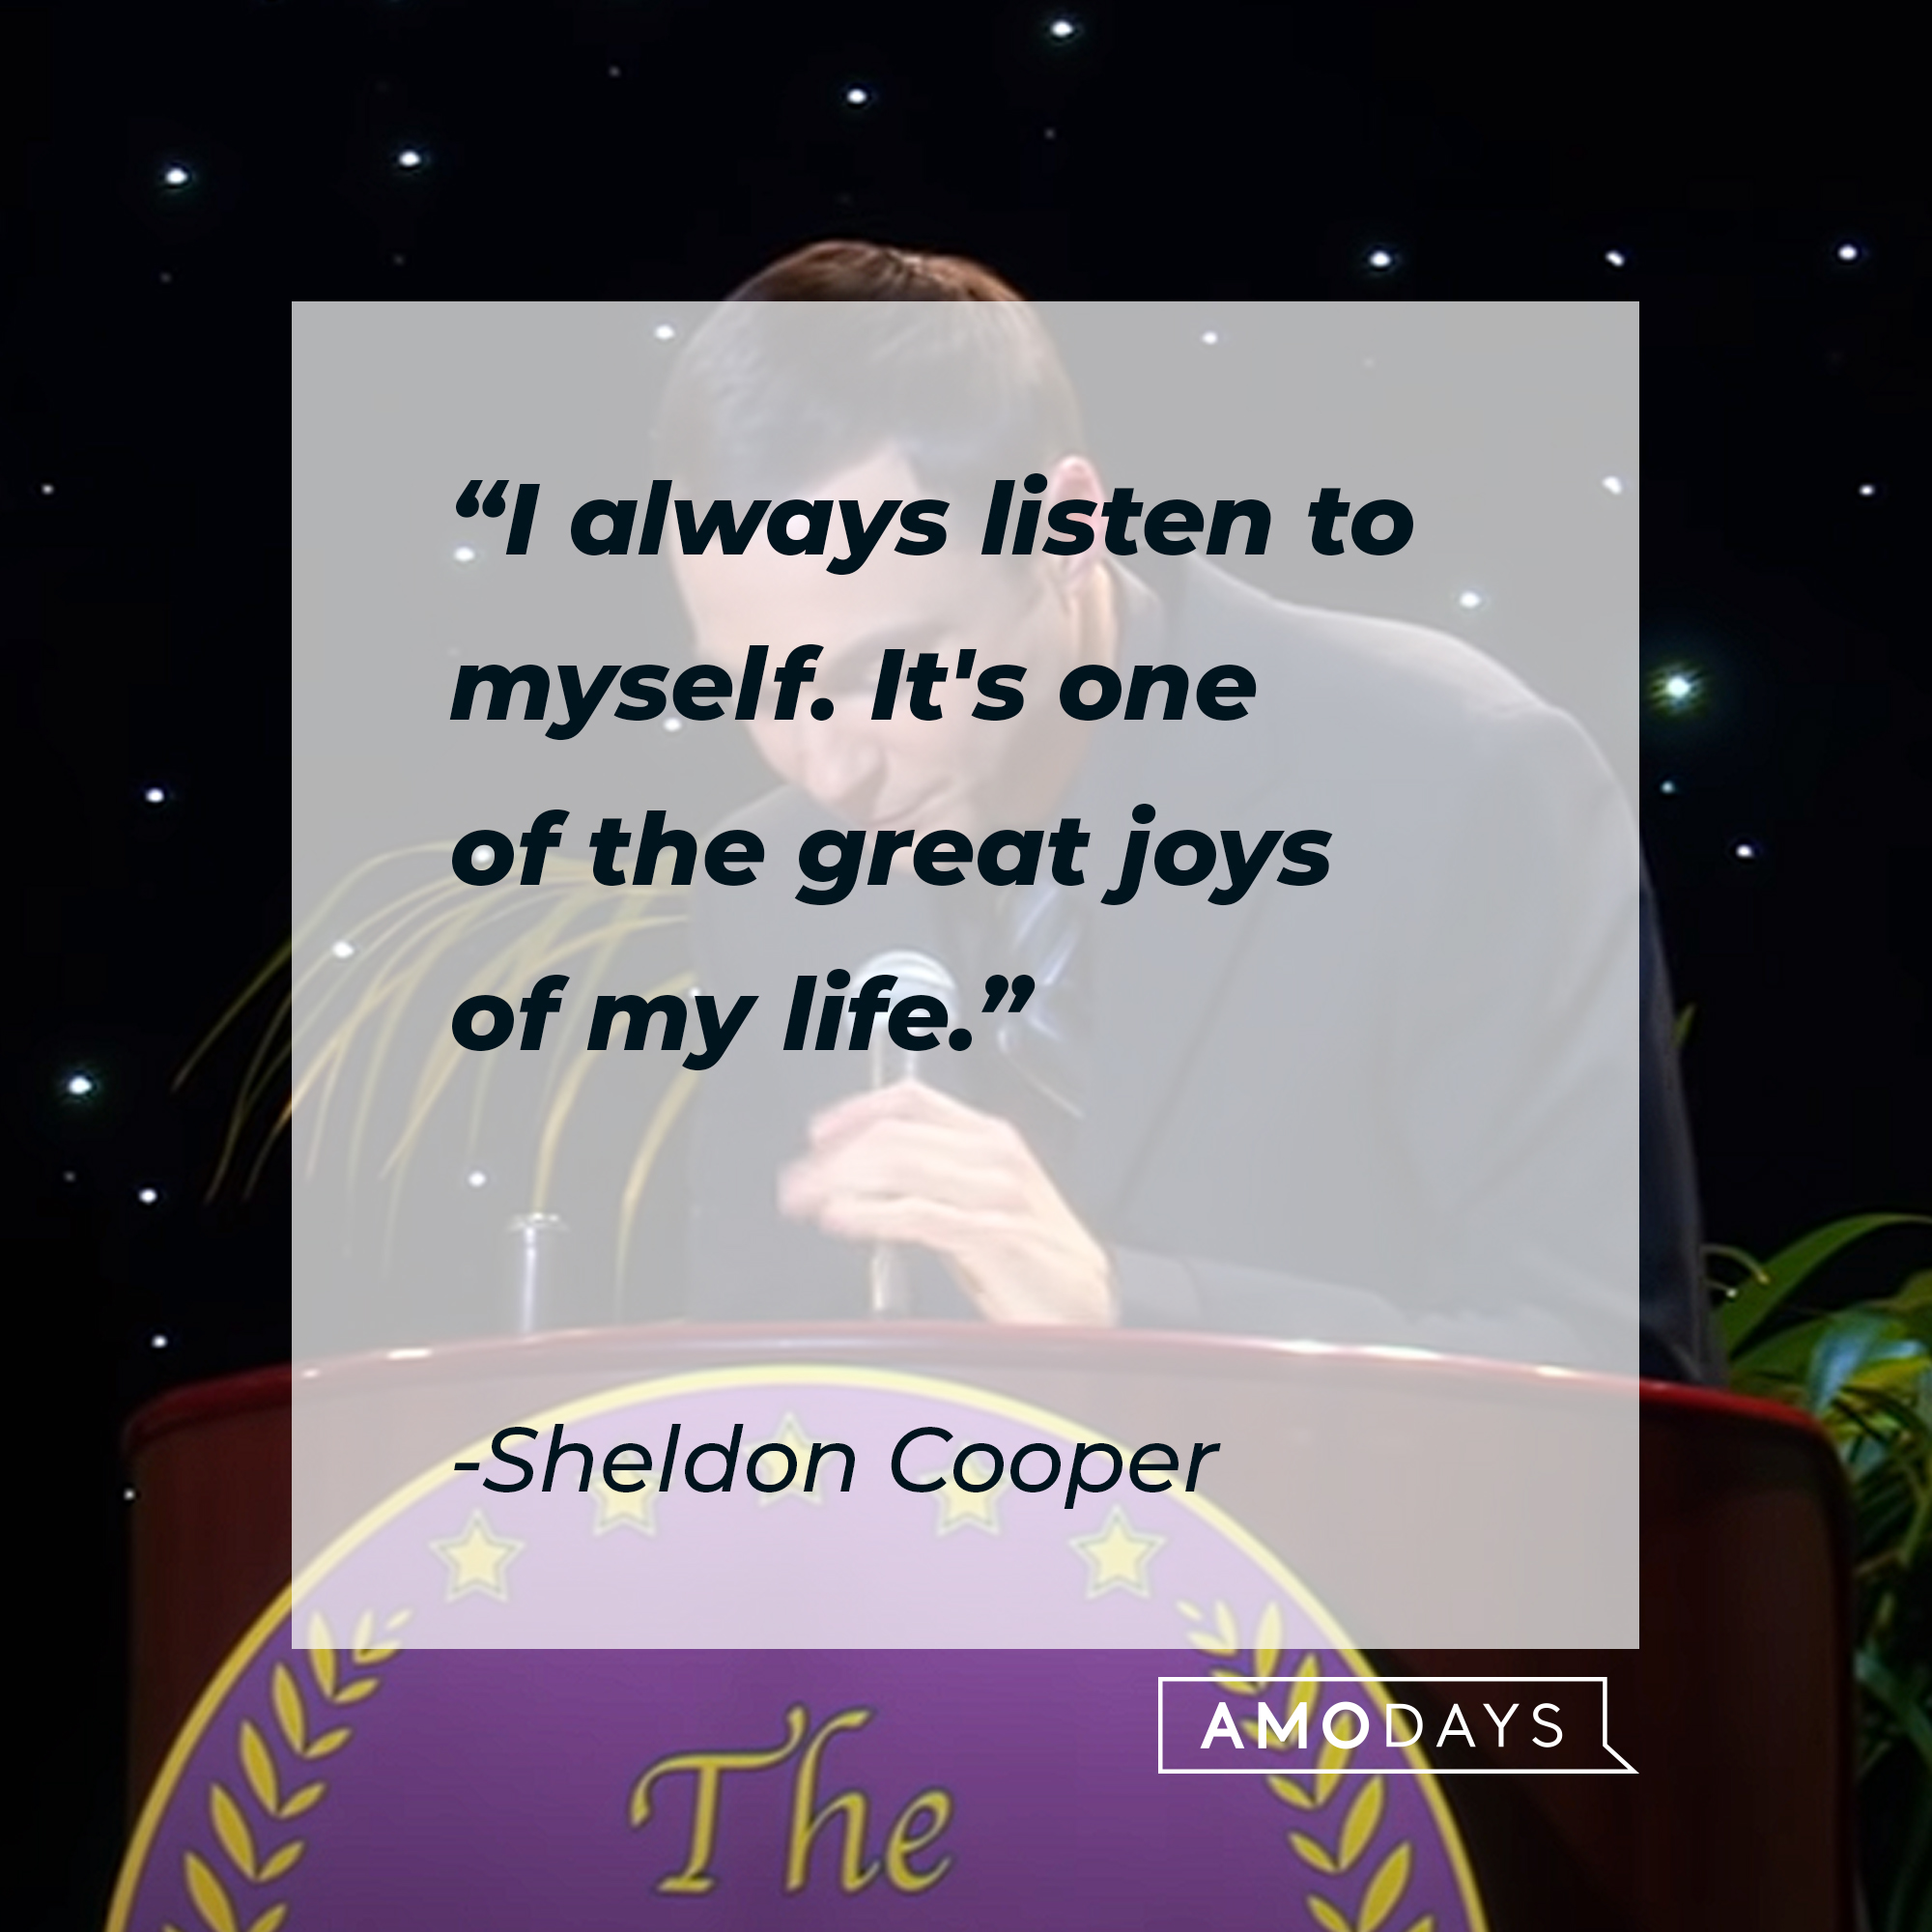 Sheldon Cooper's quote: "I always listen to myself. It's one of the great joys of my life." | Source: youtube.com/warnerbrostv